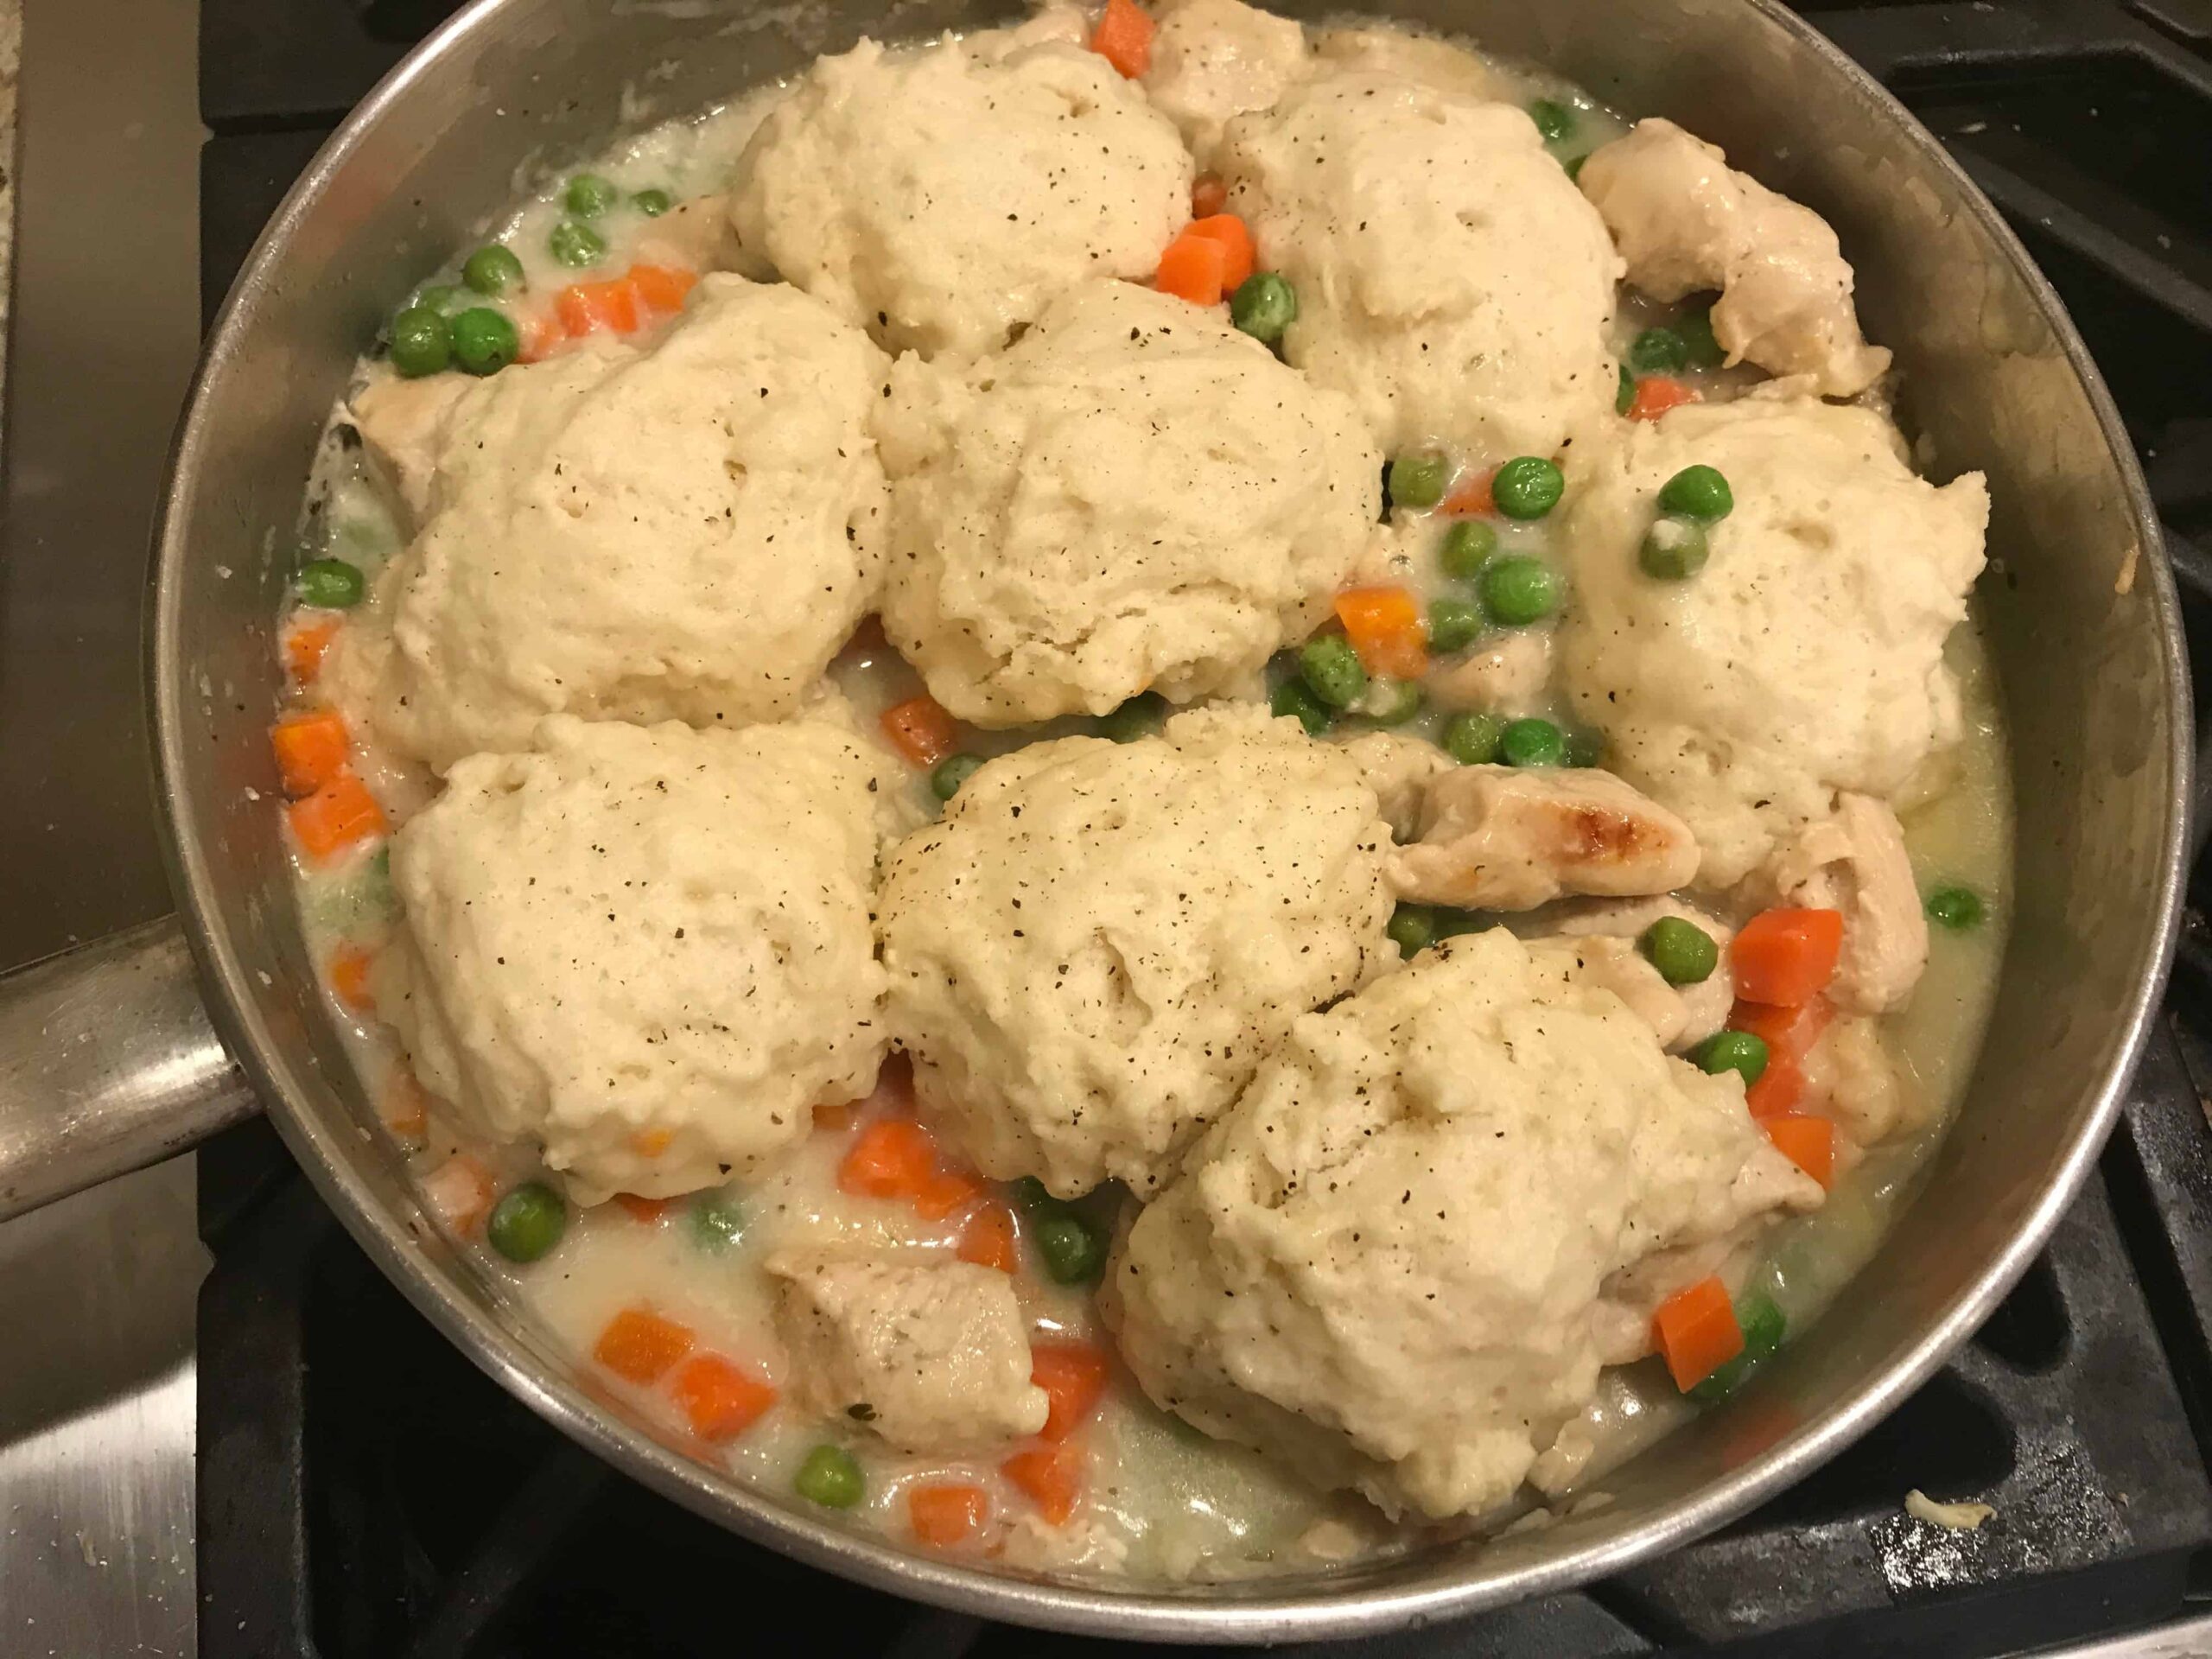 Homemade chicken and dumplings - The Dinner Daily